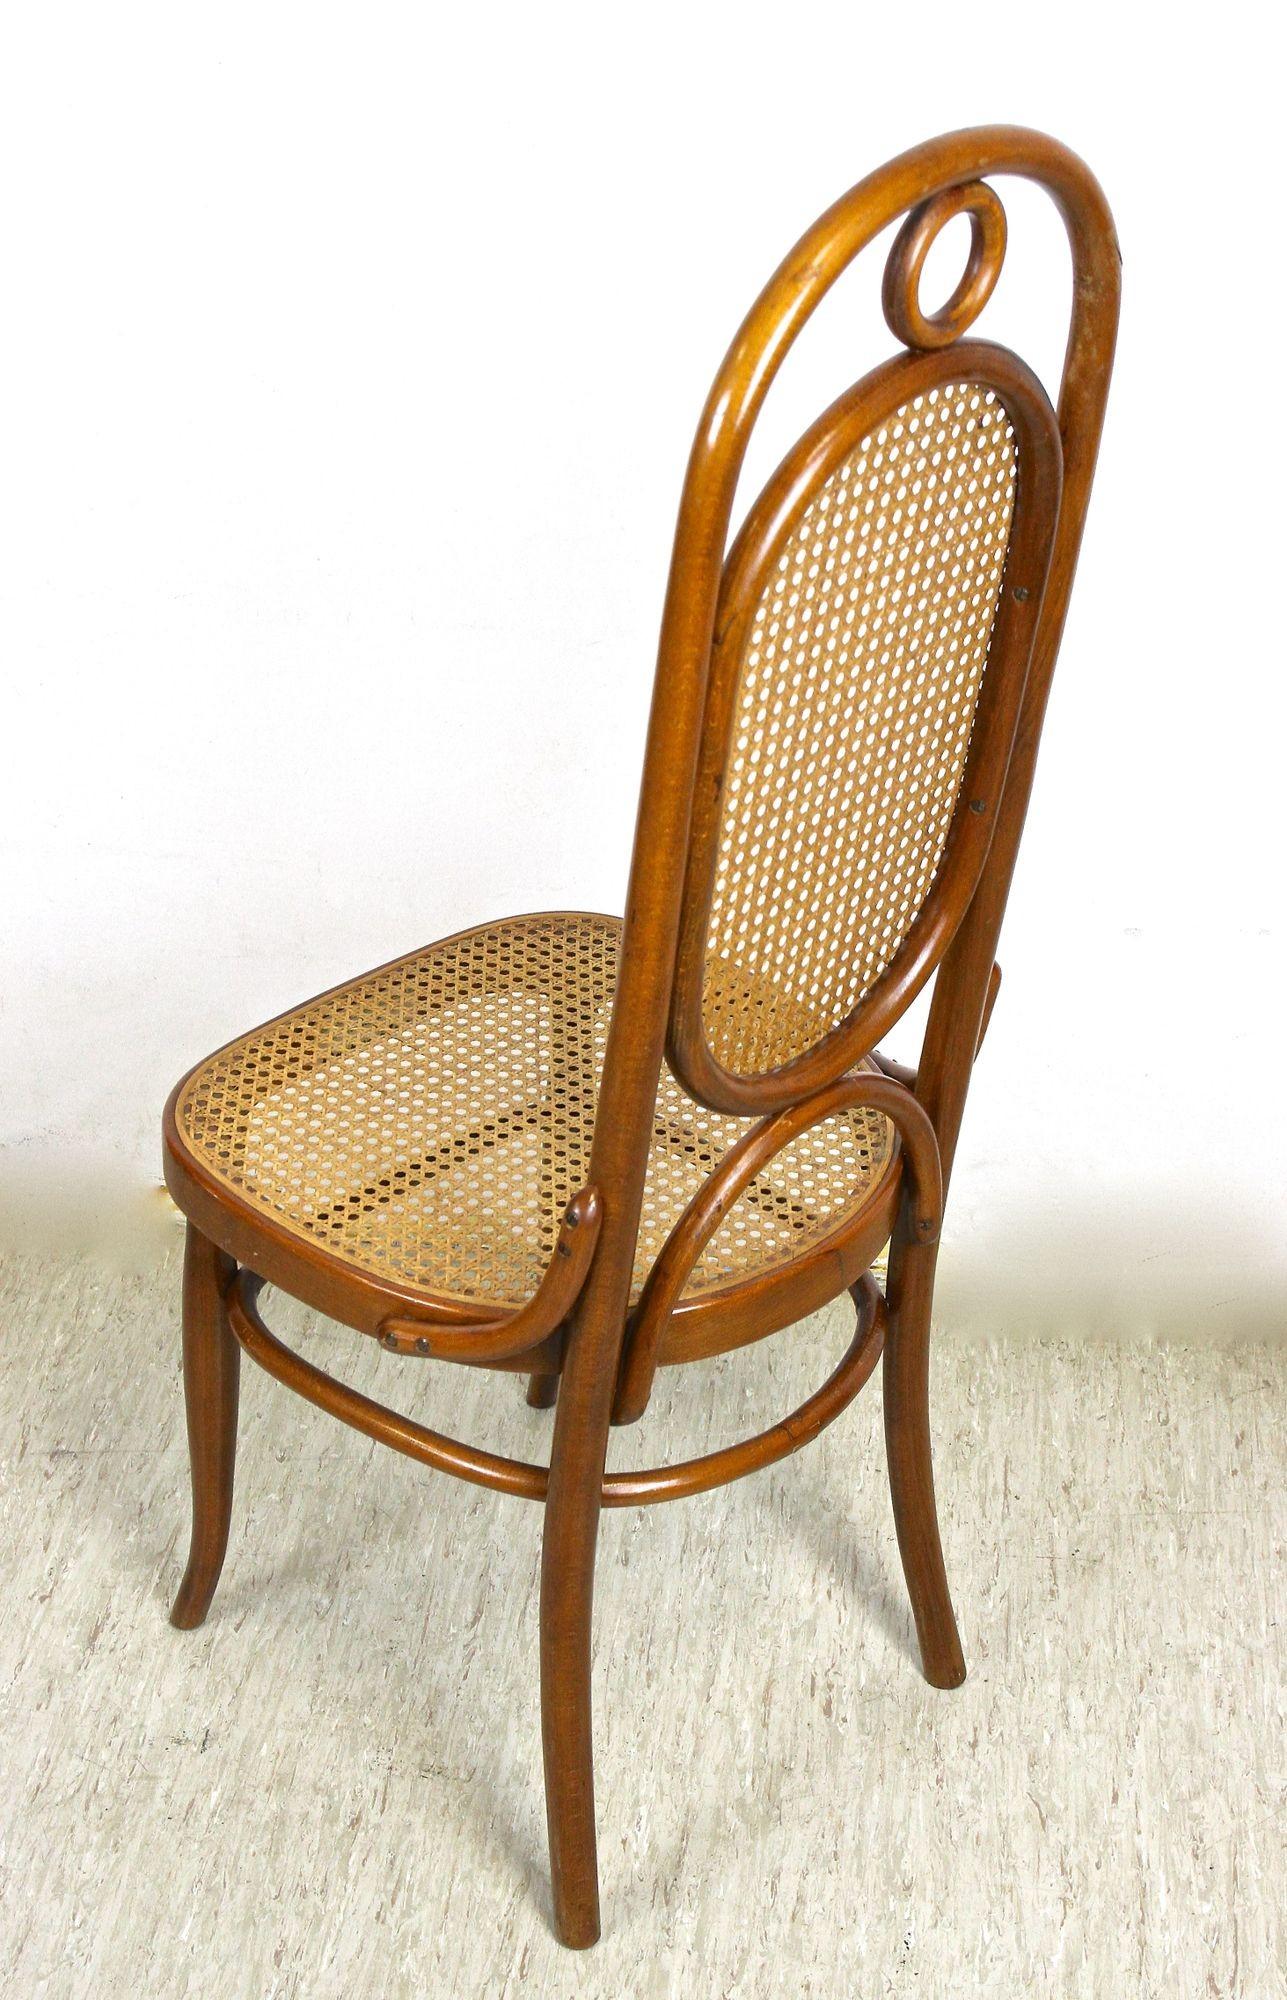 Beech Thonet Bentwood Chairs with Table, Art Nouveau Seating Set, Austria, circa 1915 For Sale